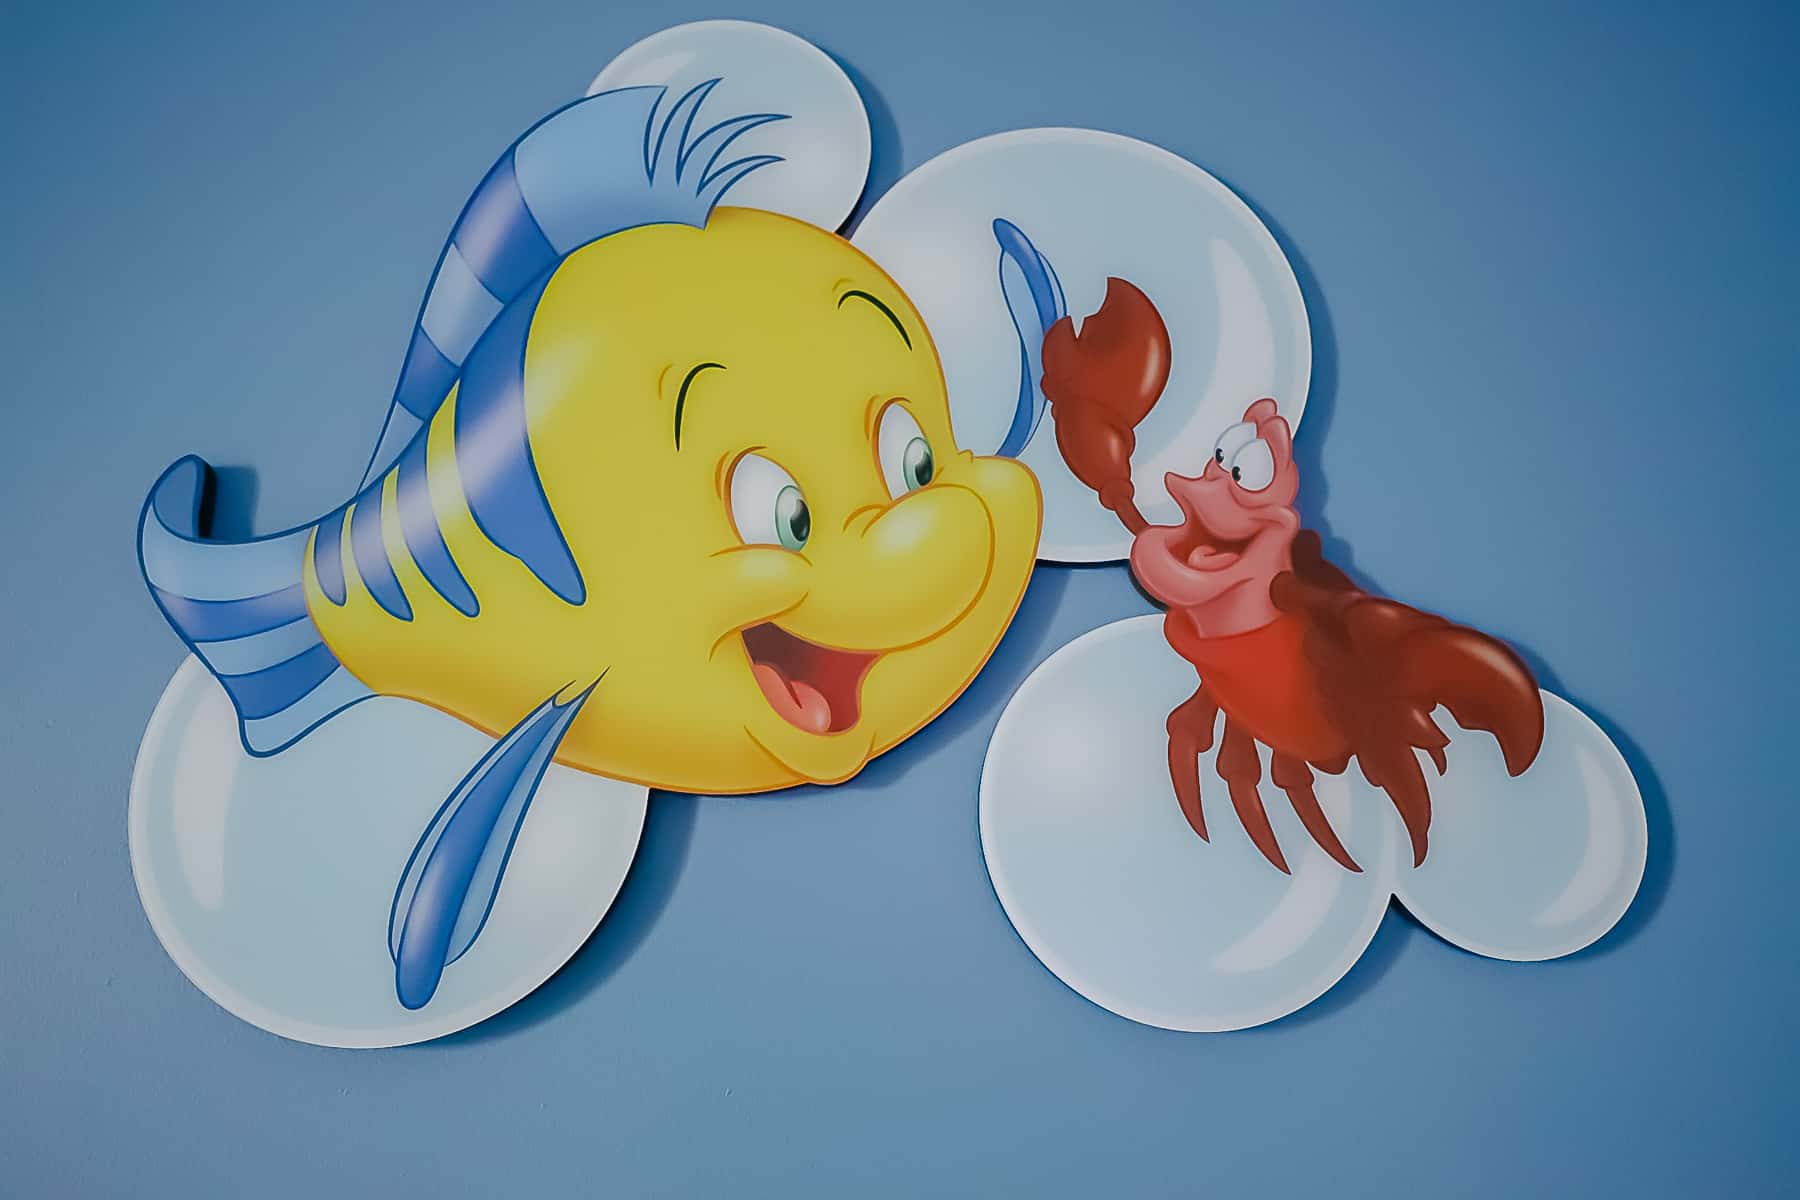 Flounder and Sebastian featured in artwork in the room.